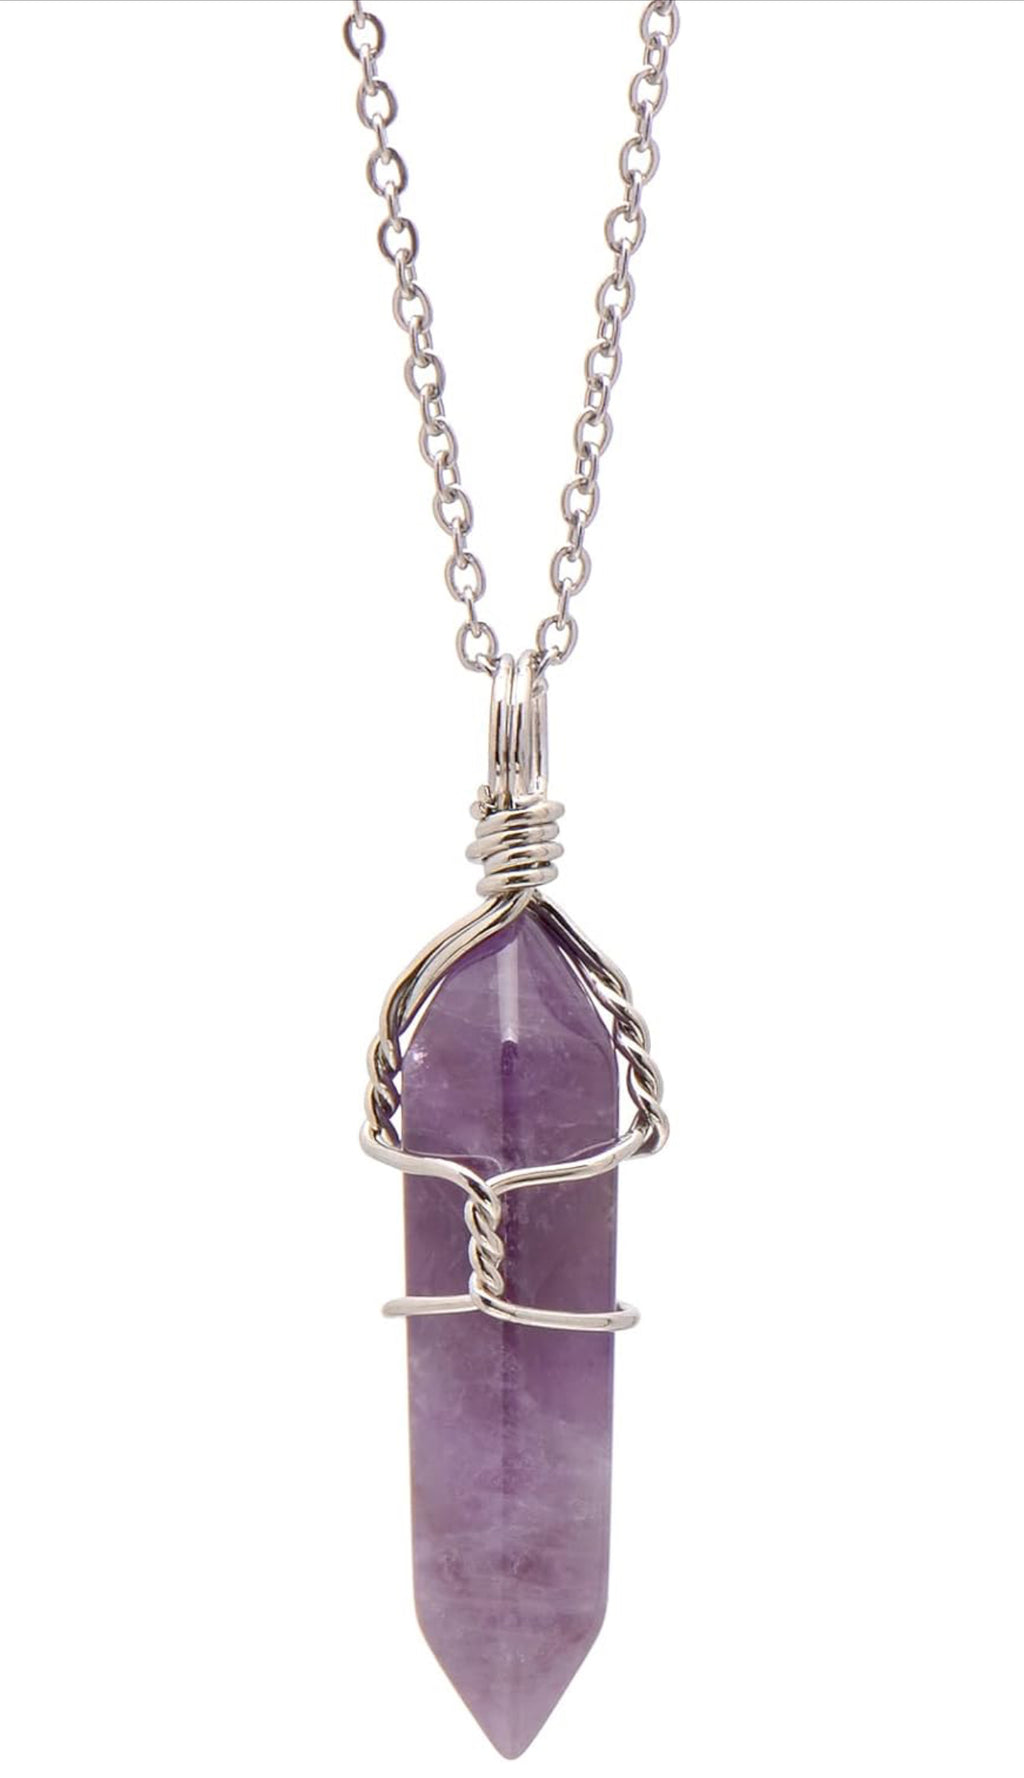 Amethyst and Silver-Wrapped Pendant Necklace